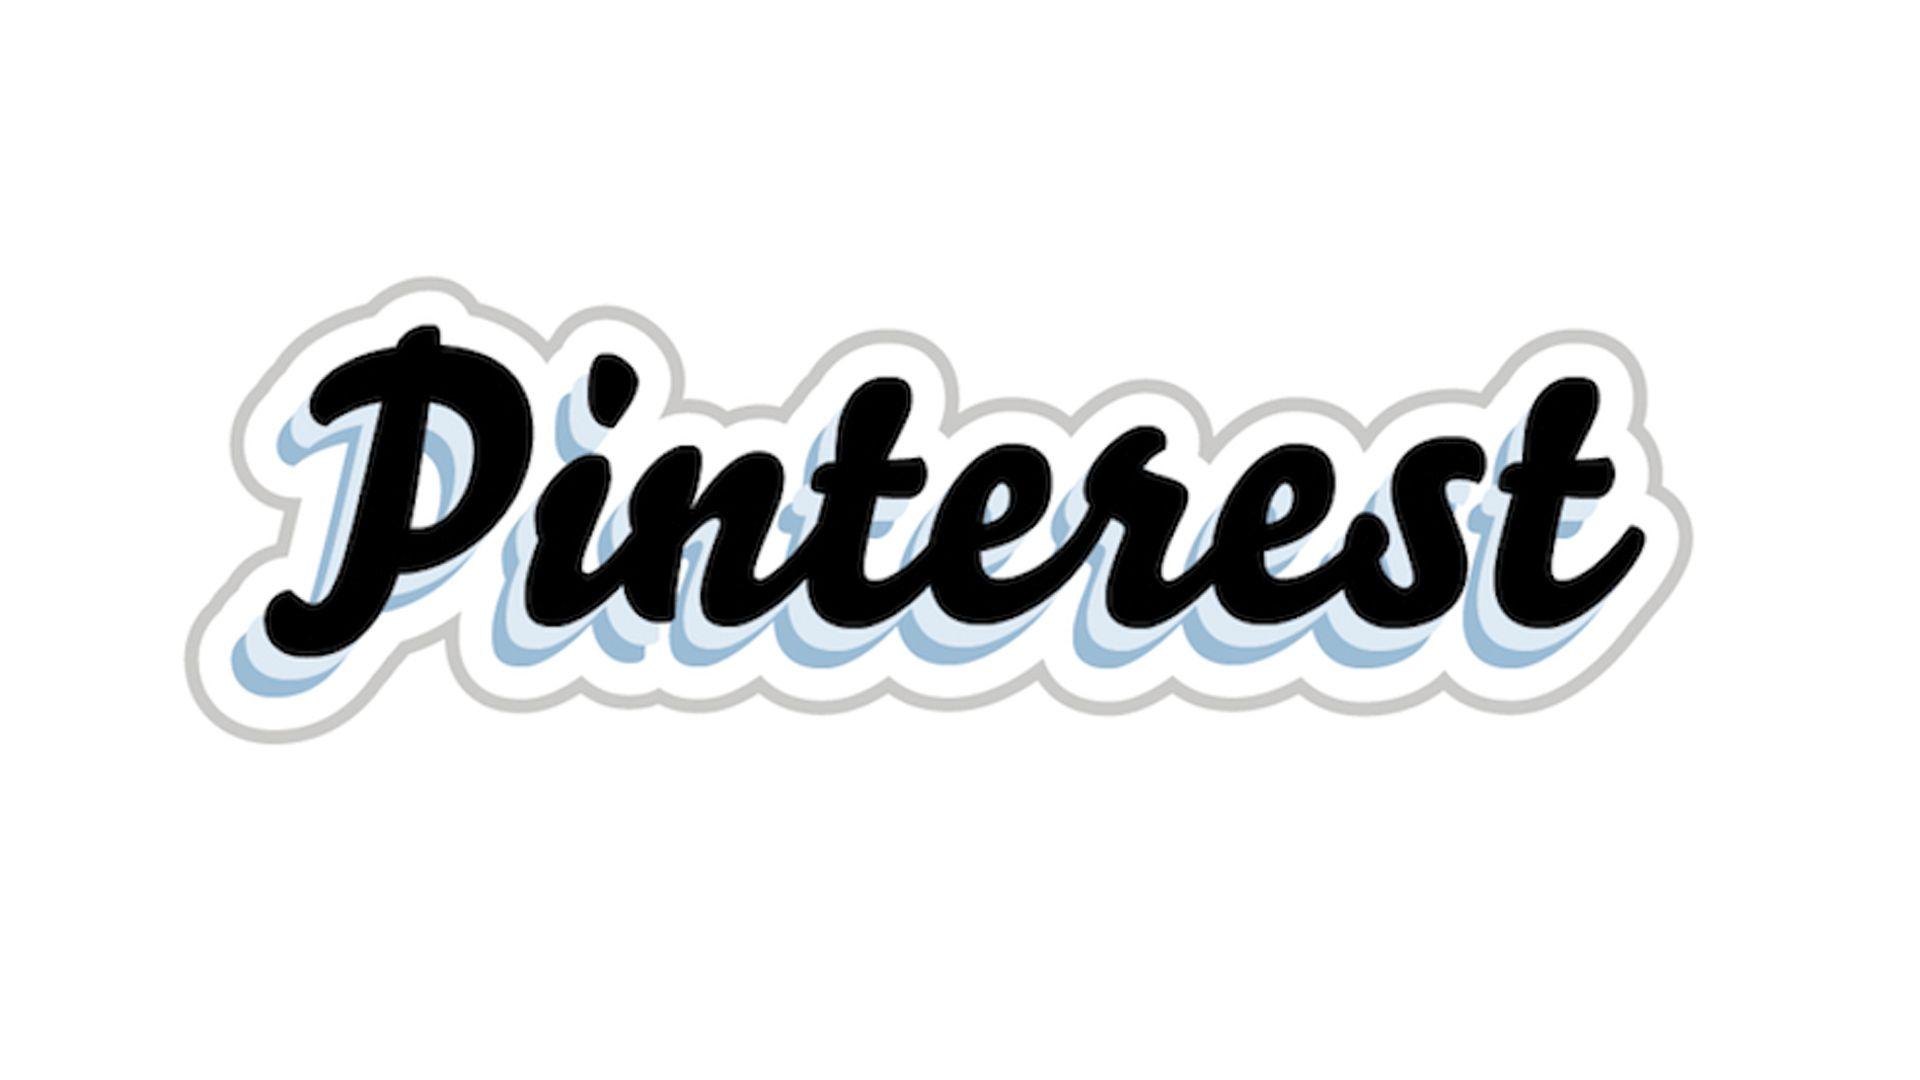 Pinterets Logo - Meaning Pinterest logo and symbol | history and evolution